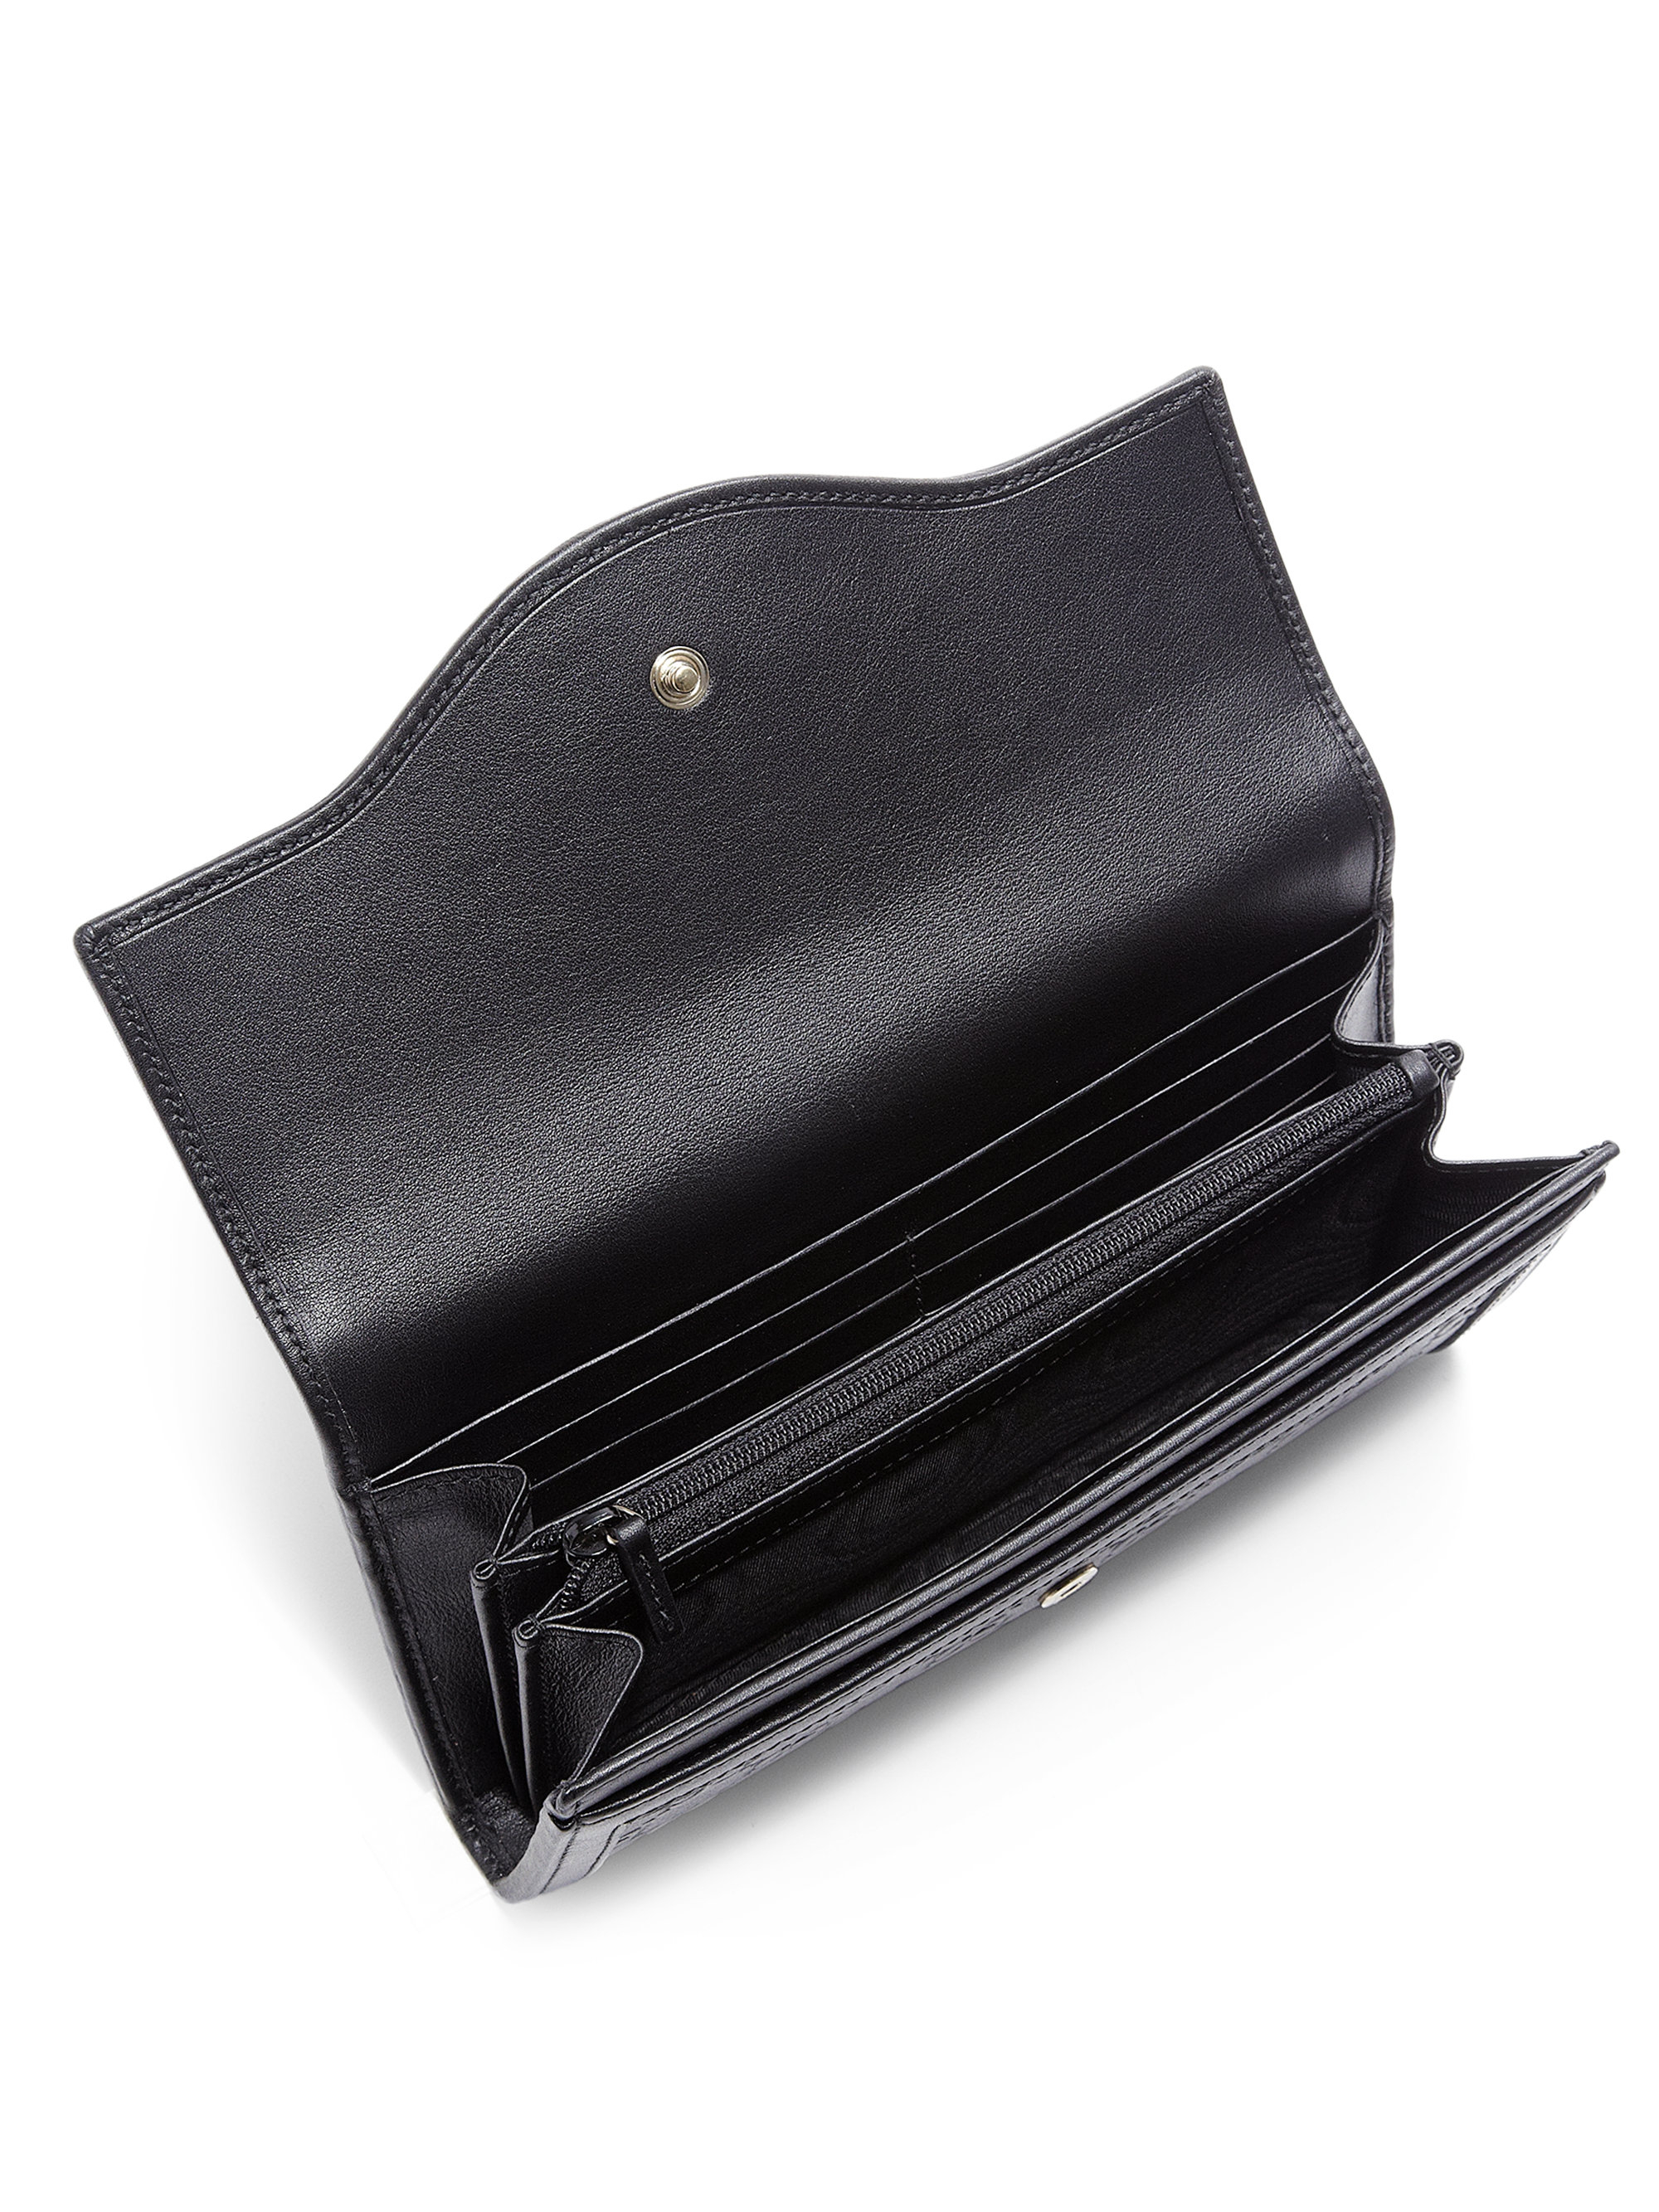 Lyst - Gucci Sukey Ssima Leather Continental Wallet in Black for Men